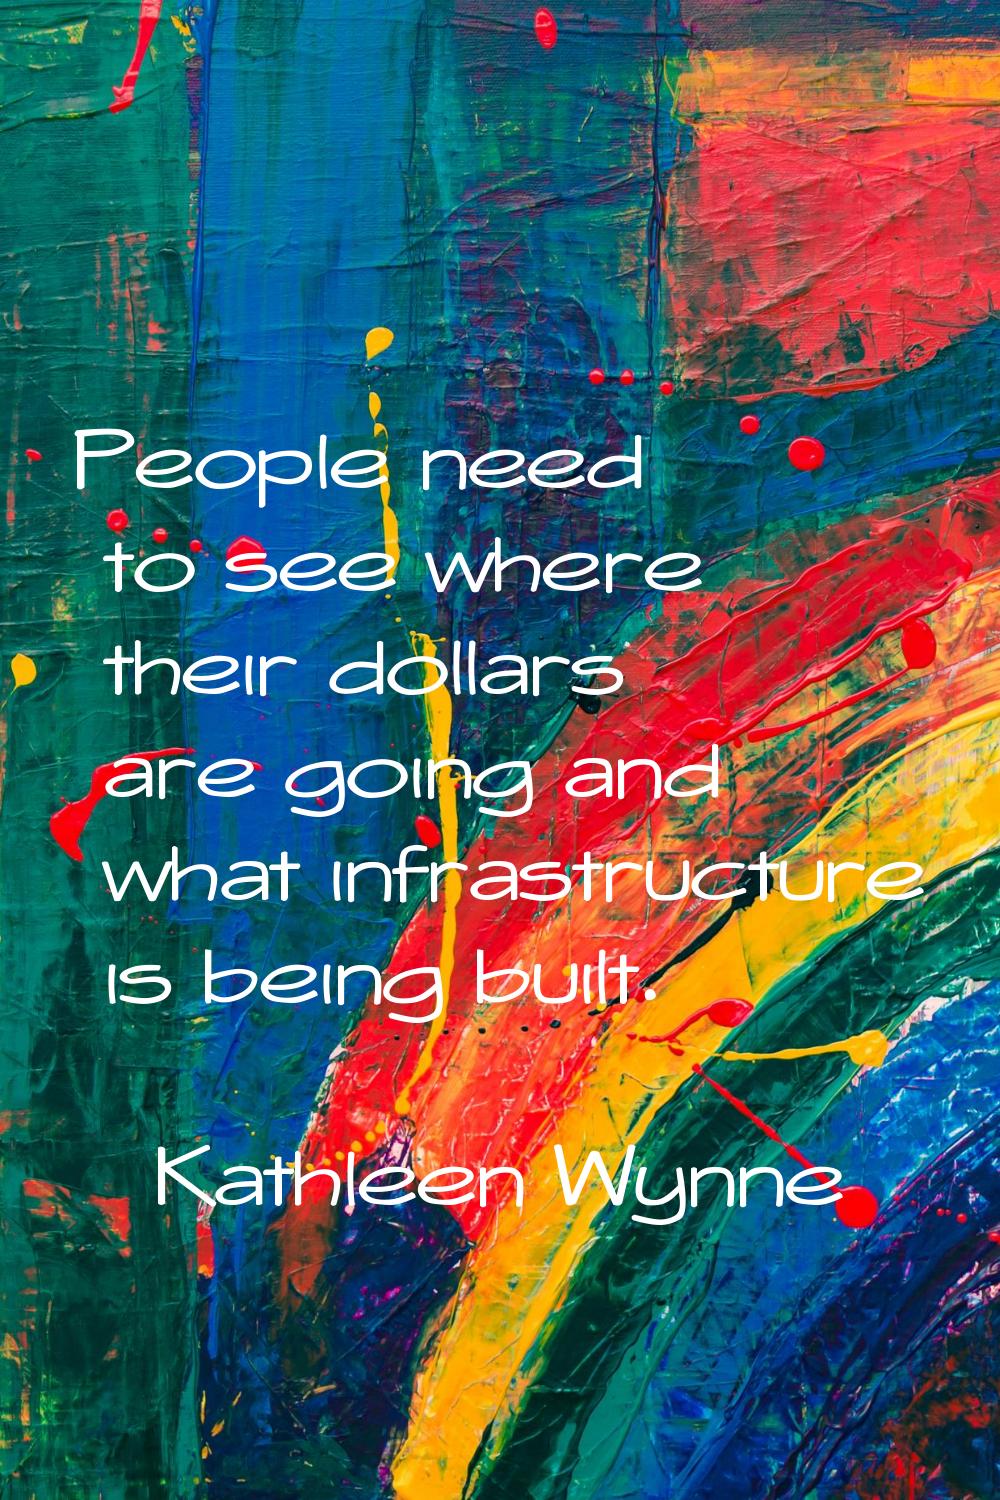 People need to see where their dollars are going and what infrastructure is being built.